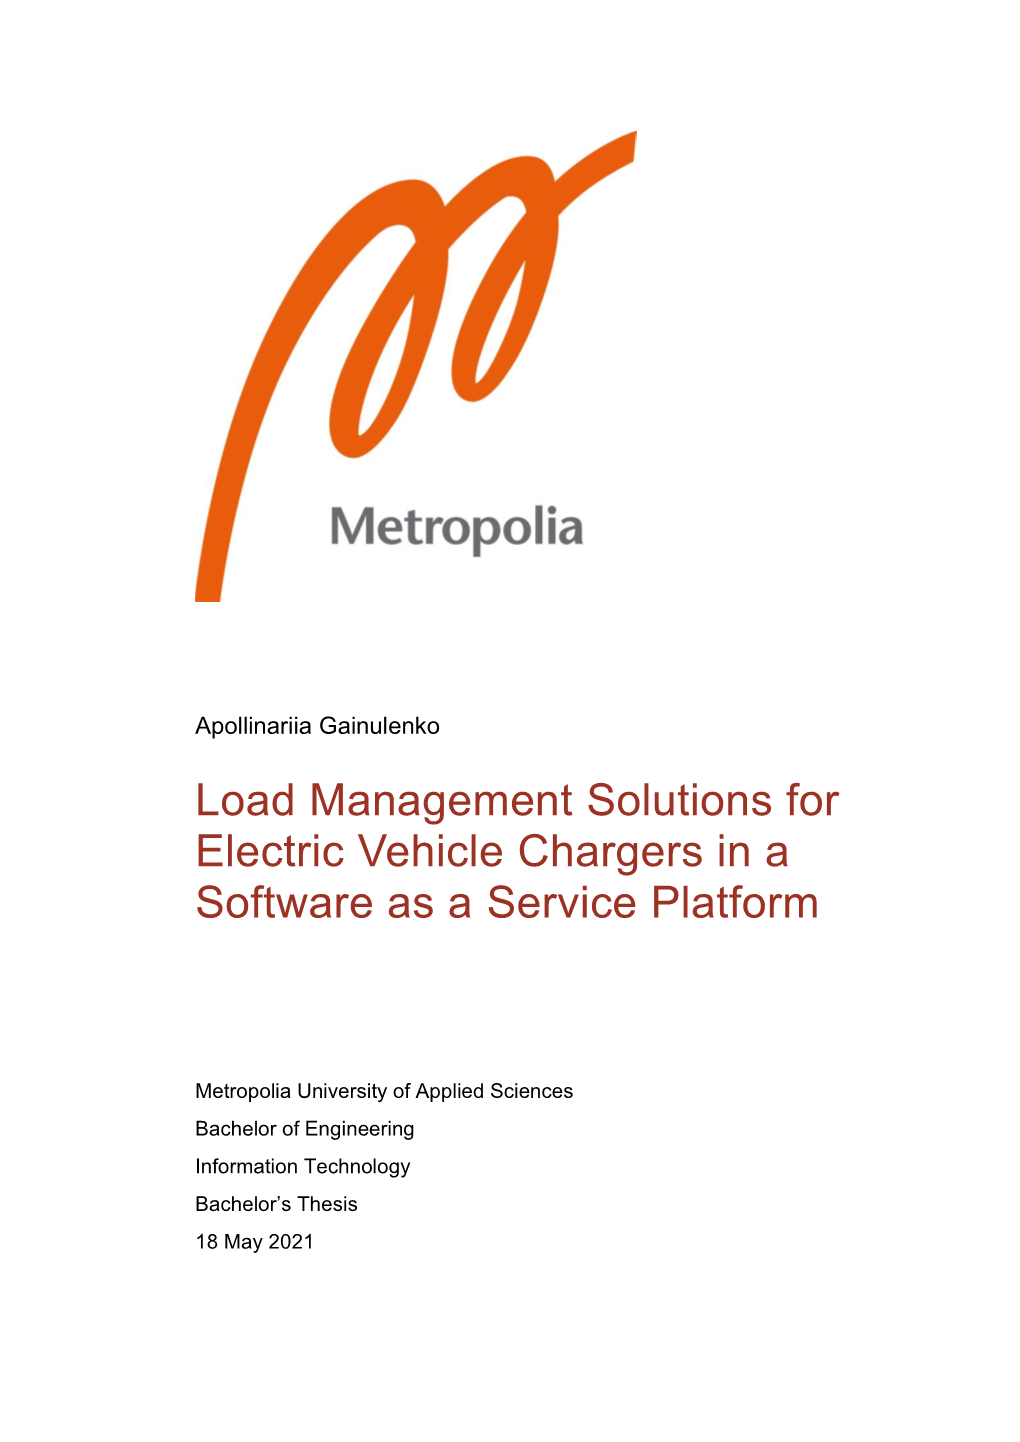 Load Management Solutions for Electric Vehicle Chargers in a Software As a Service Platform